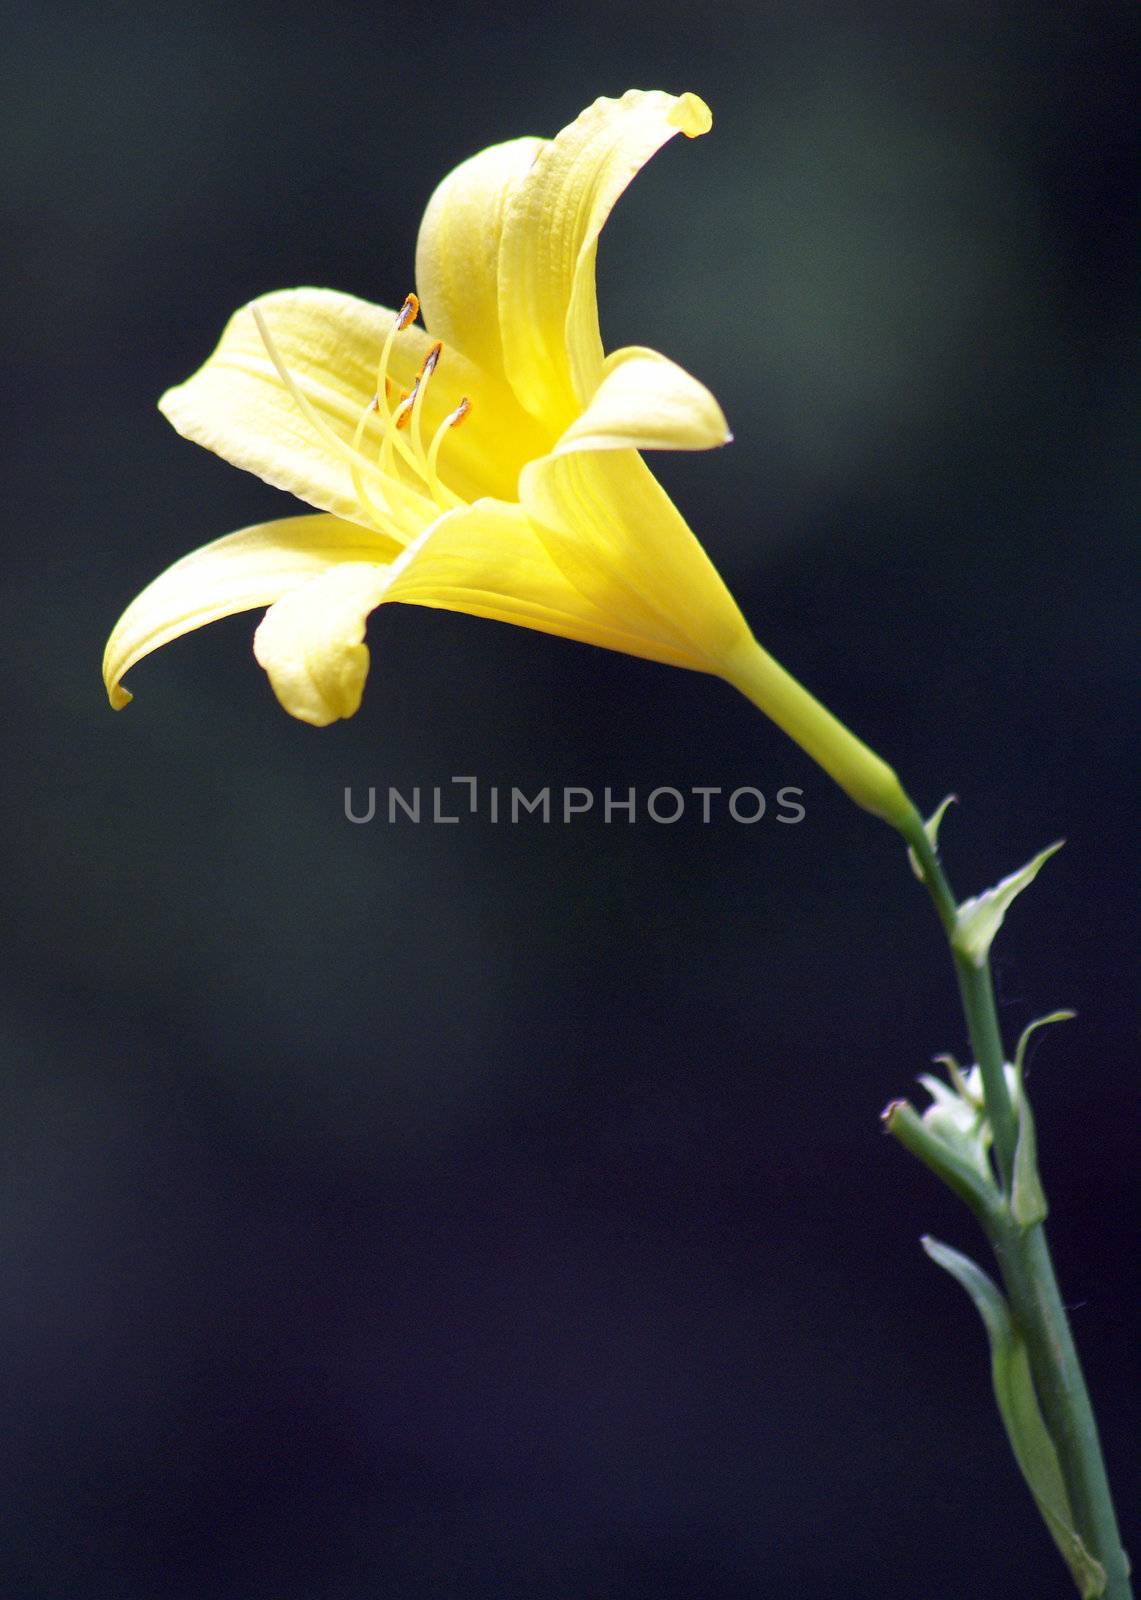 An early spring flower on a contrasting background.